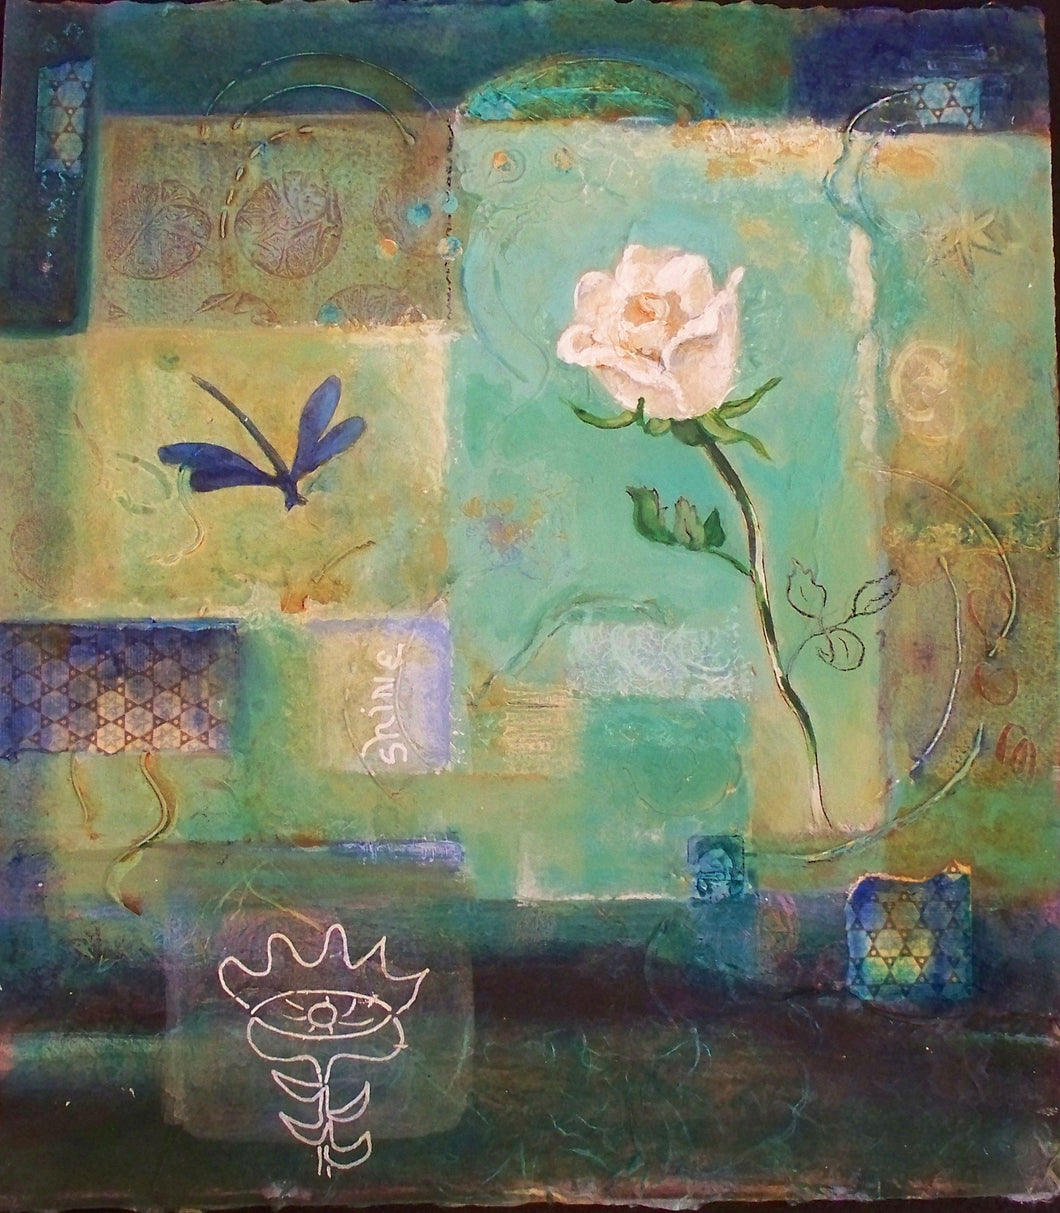 Spirit of the Rose - sold